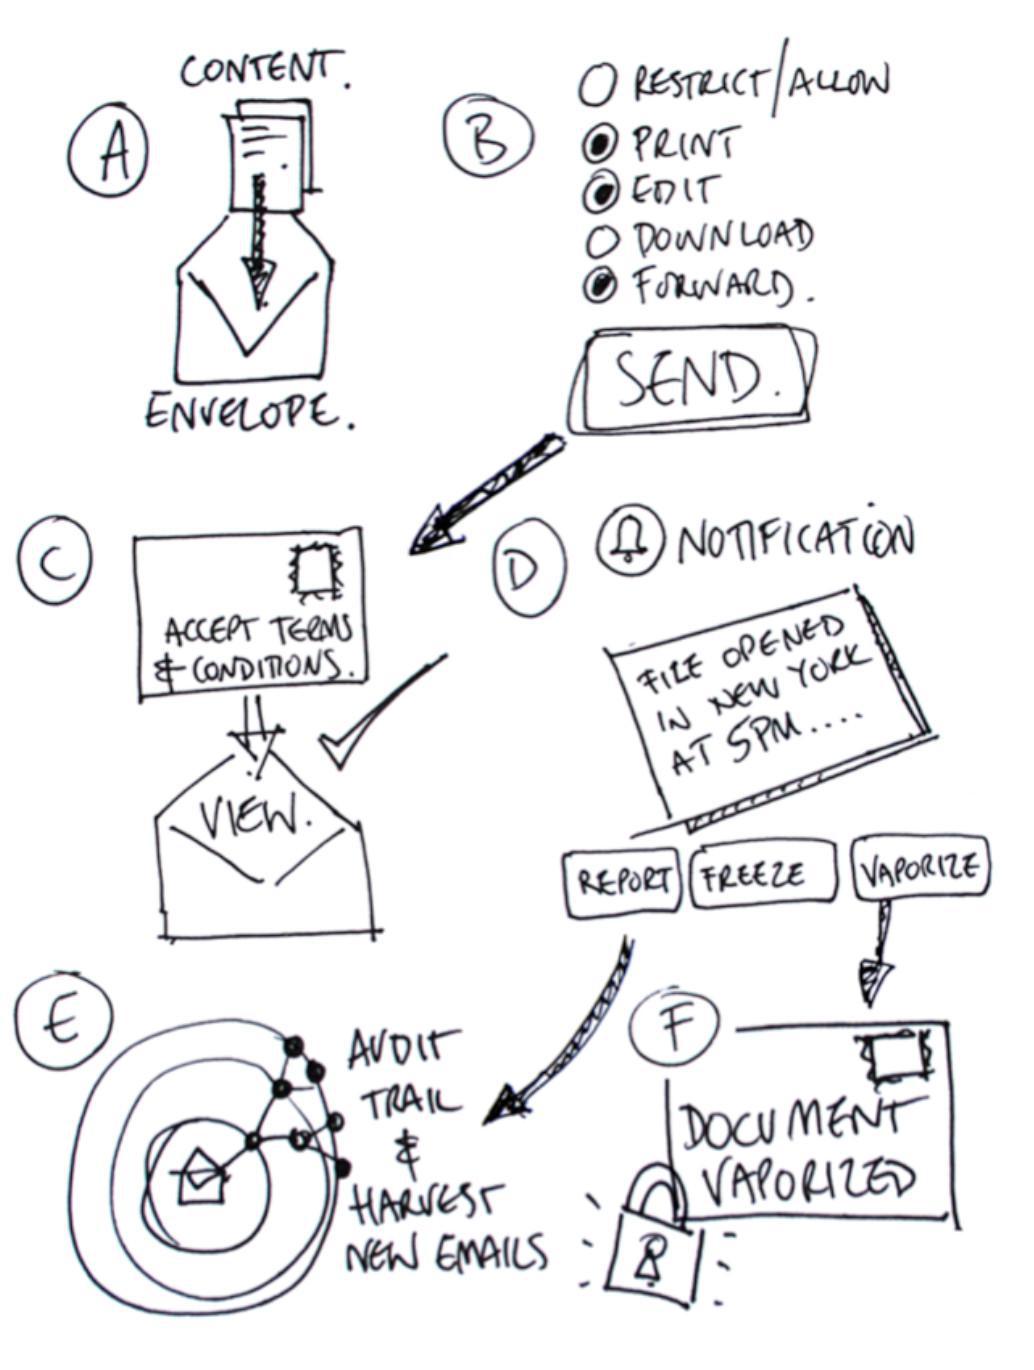 Enviie the Virtual Envelope: How to maintain privacy and c control